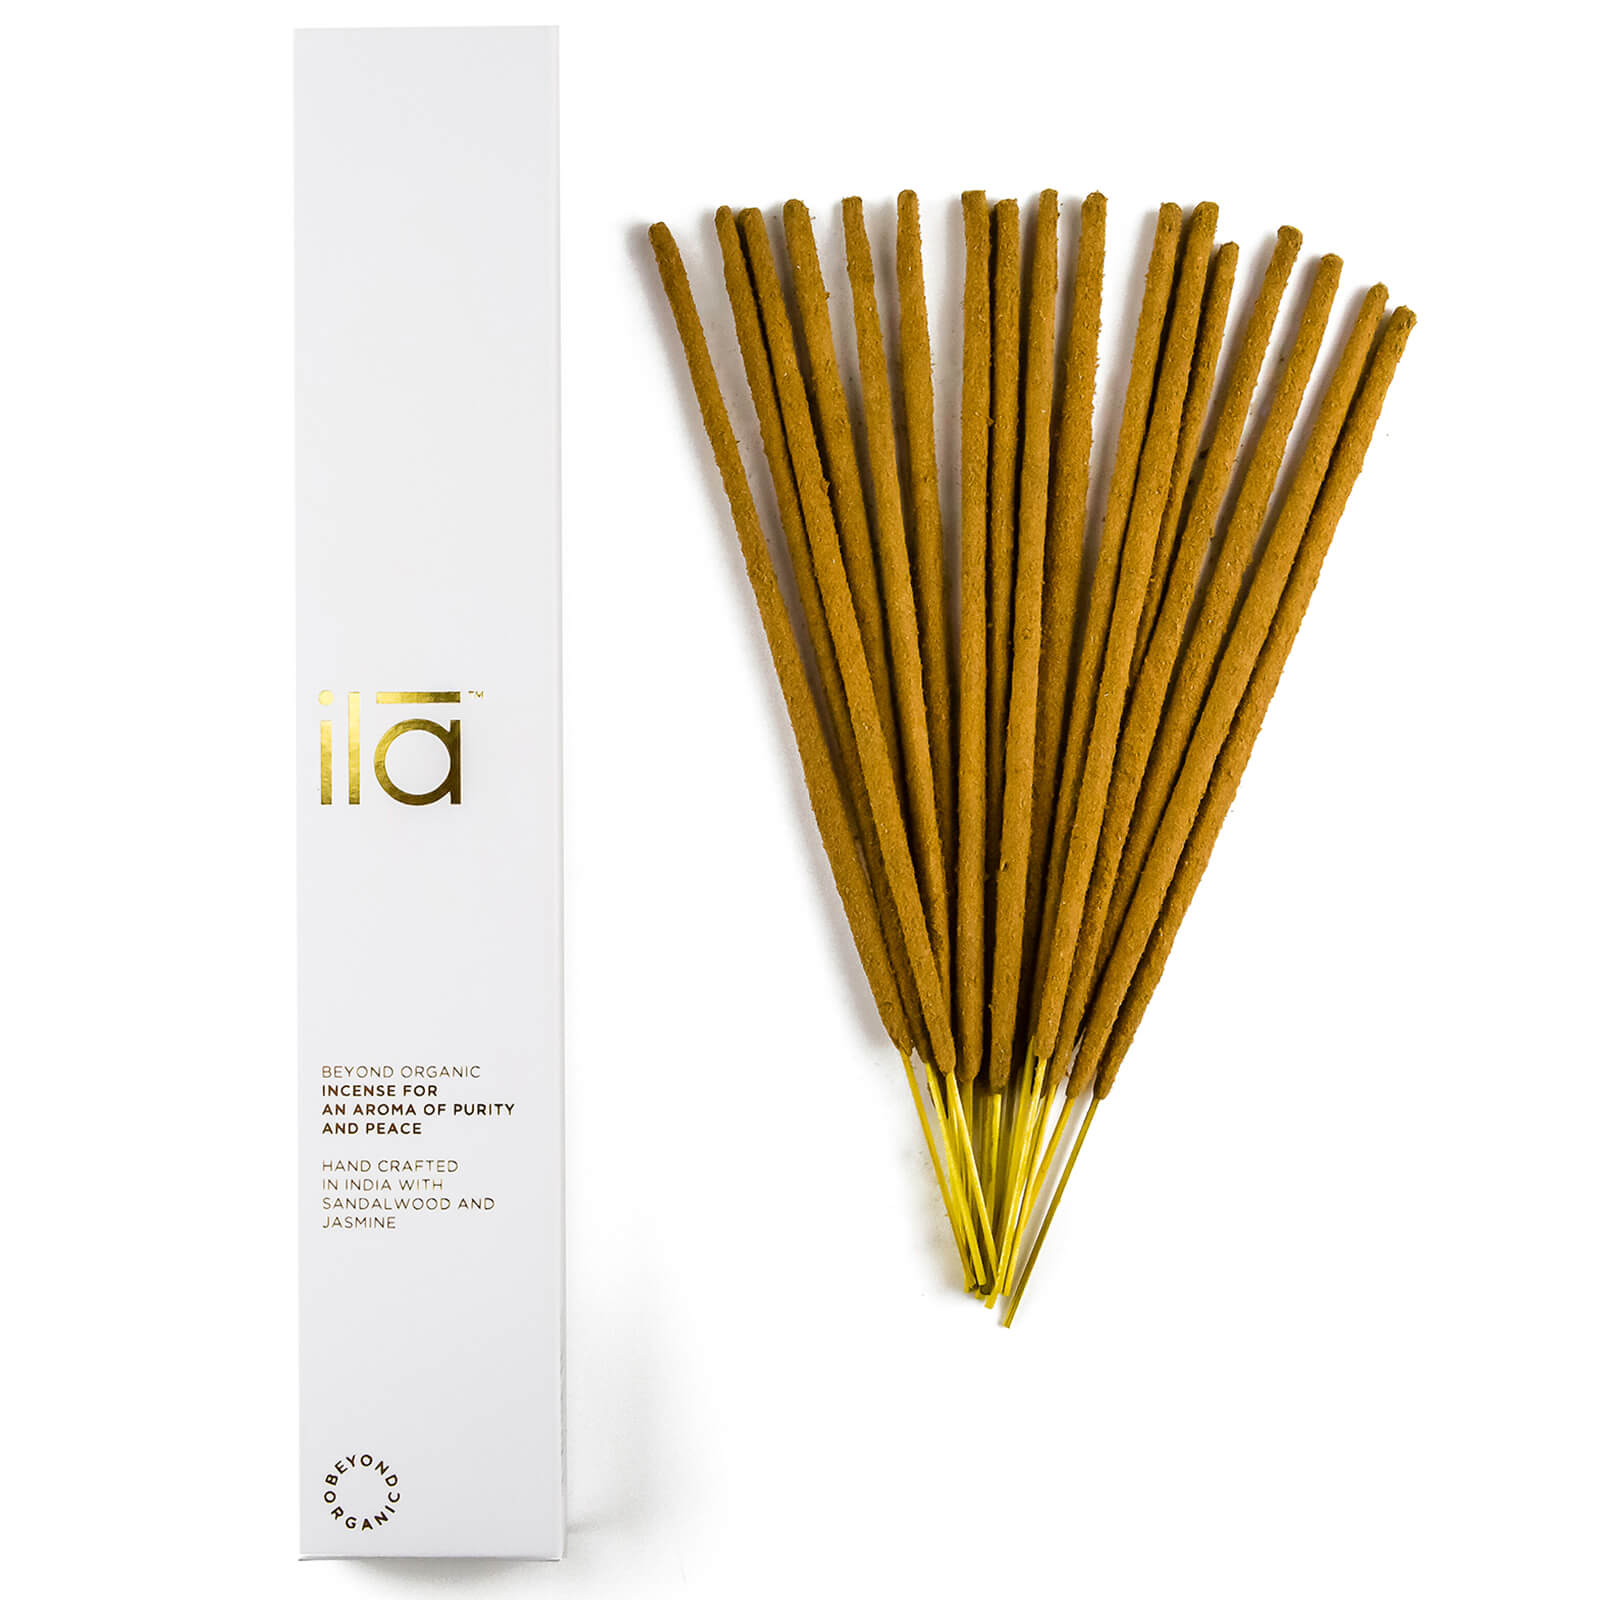 ila-spa Incense for an Aroma of Purity and Peace